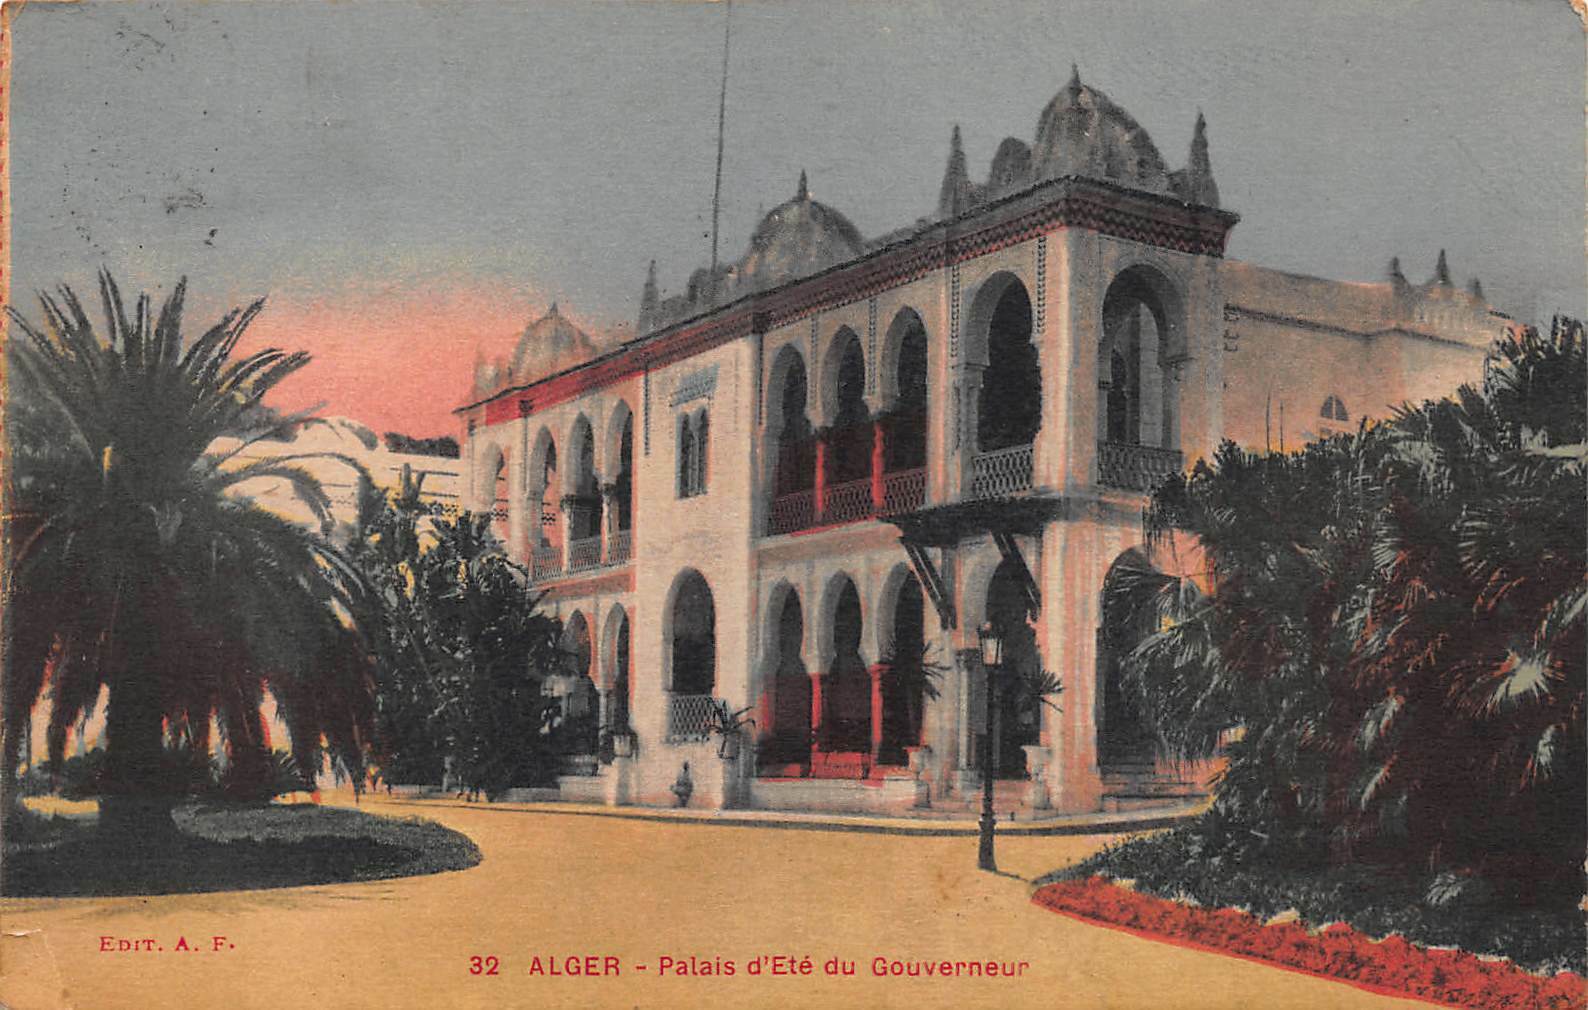 Algiers, Palace of the Governor, Algeria, Early Postcard, Used, Postage Due 2c 